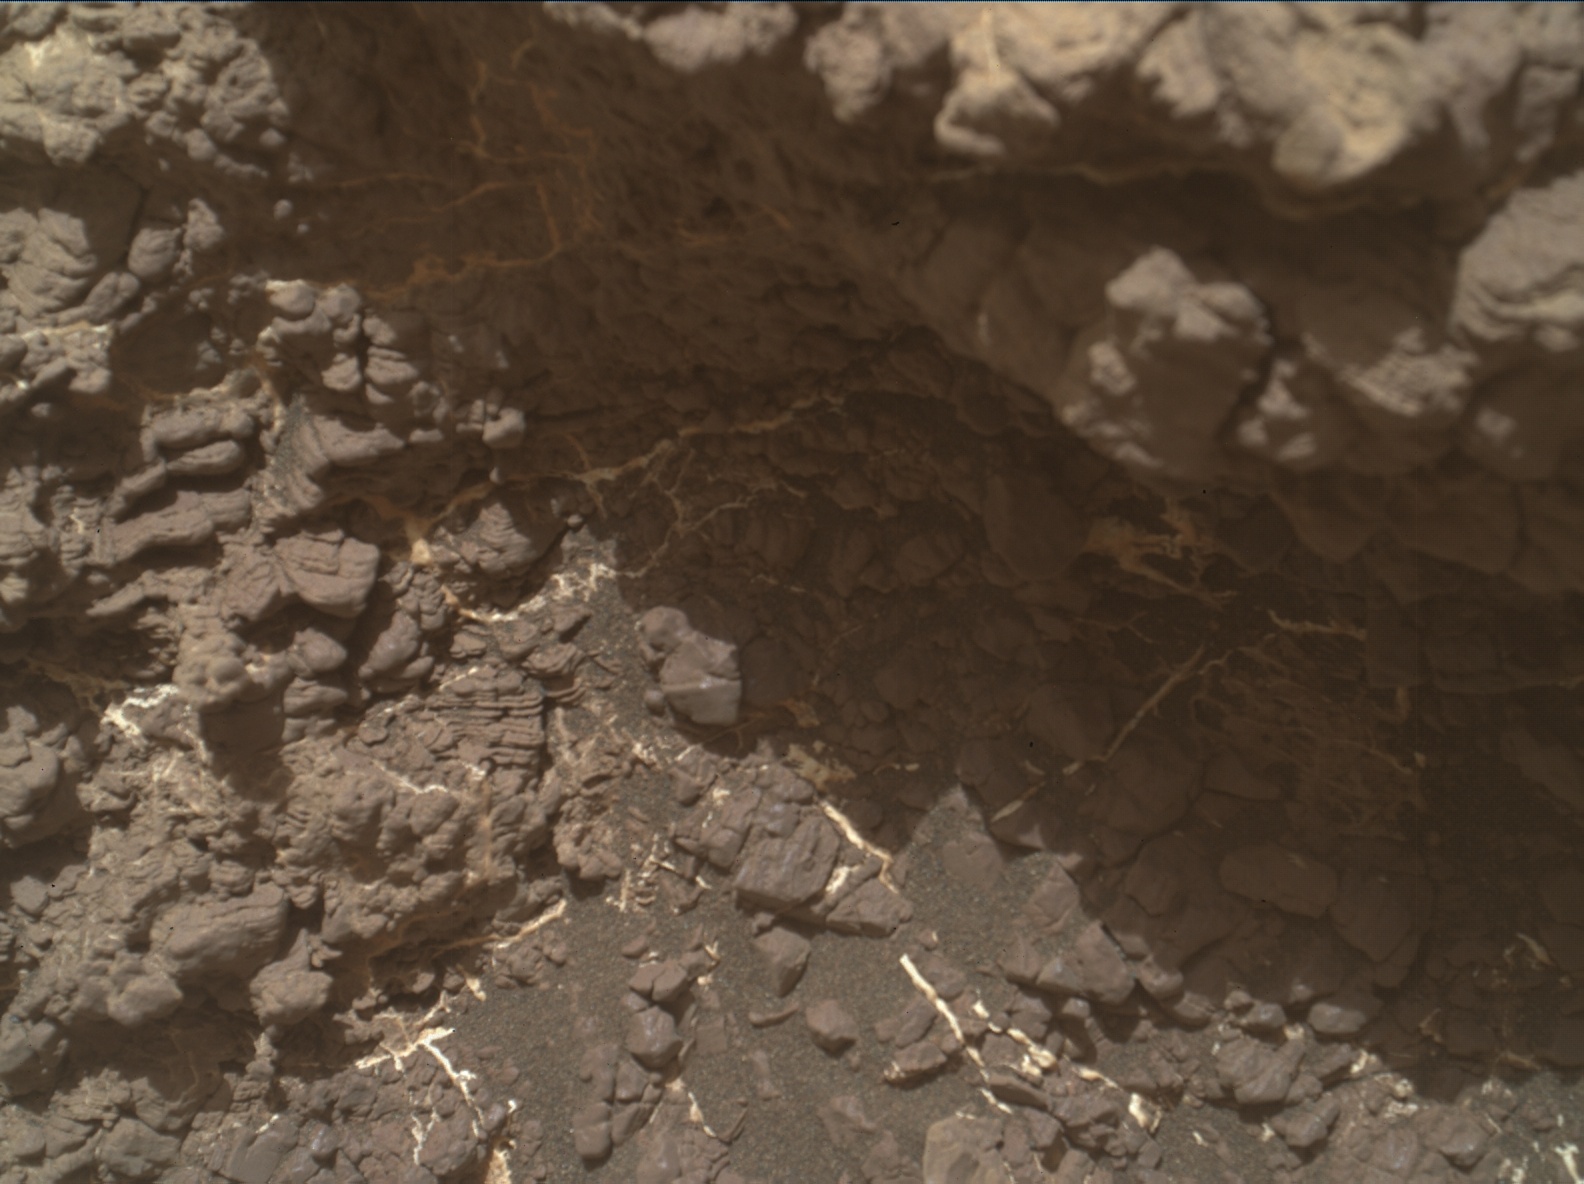 Nasa's Mars rover Curiosity acquired this image using its Mars Hand Lens Imager (MAHLI) on Sol 2452